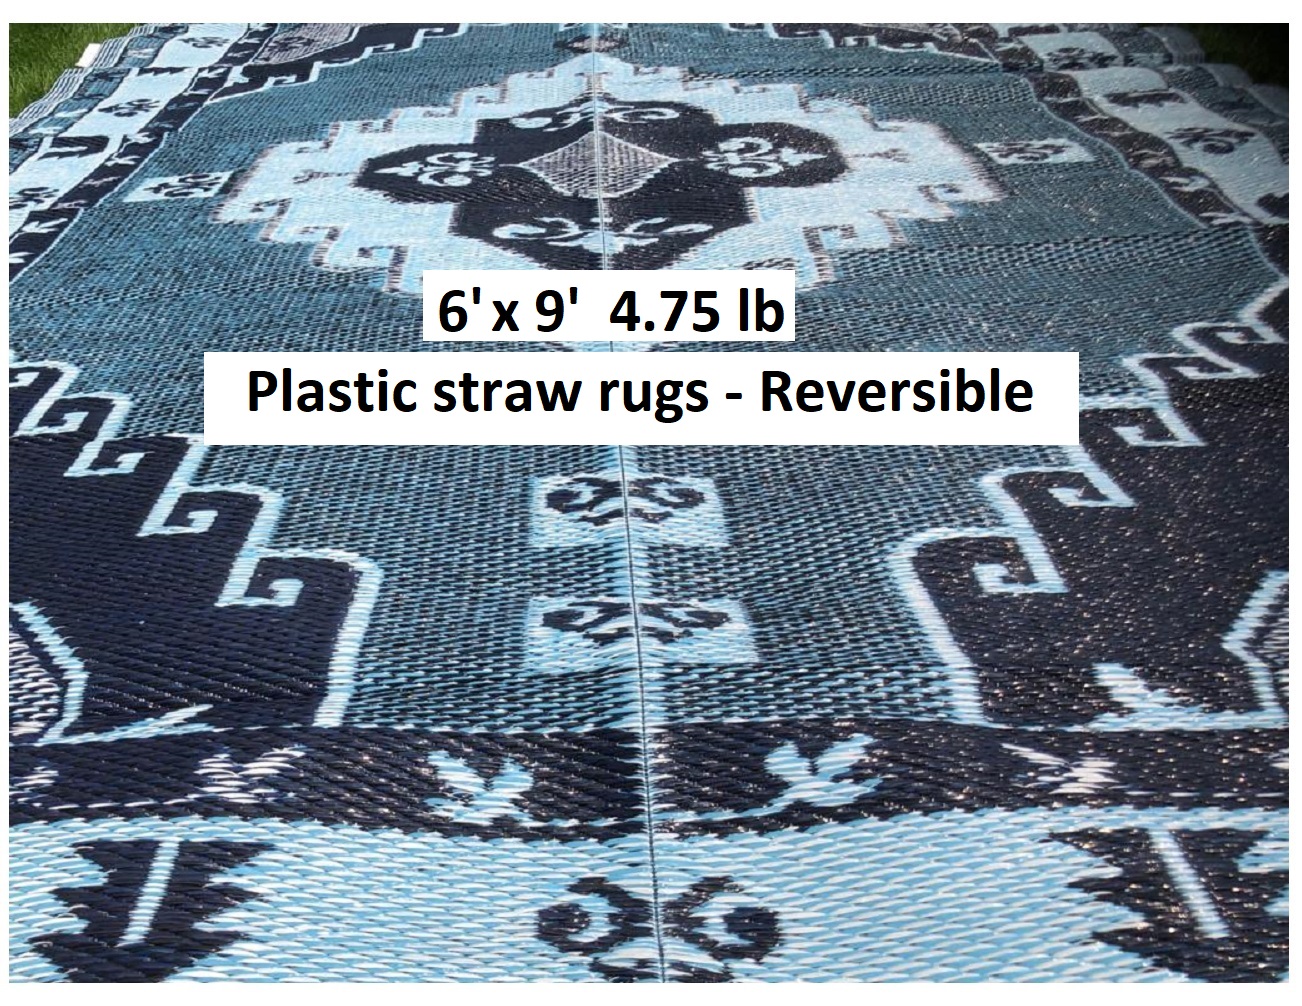 BalajeesUSA Outdoor rug Plastic straw patio rugs-6 by 9 feet Blue, Grey reversible mats waterproof rv camper mats patio rugs Clearance 140 - image 4 of 9